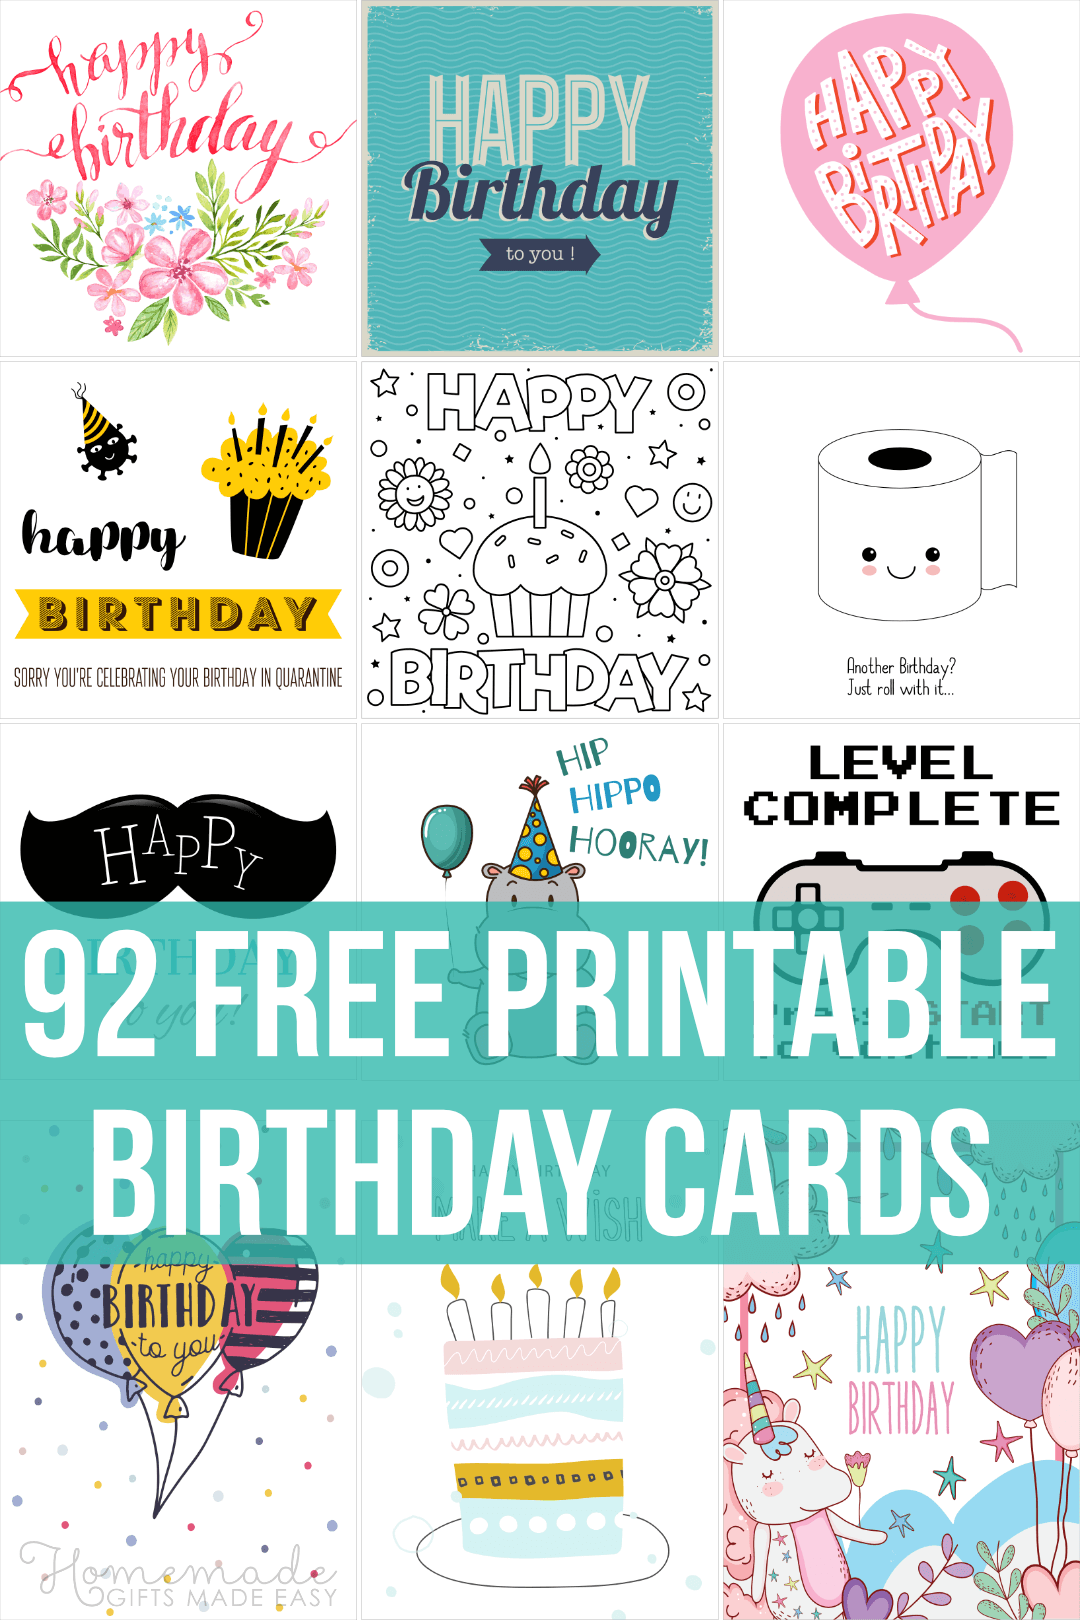 65 Best Bible Verses For Birthdays Inspiration For Card Messages